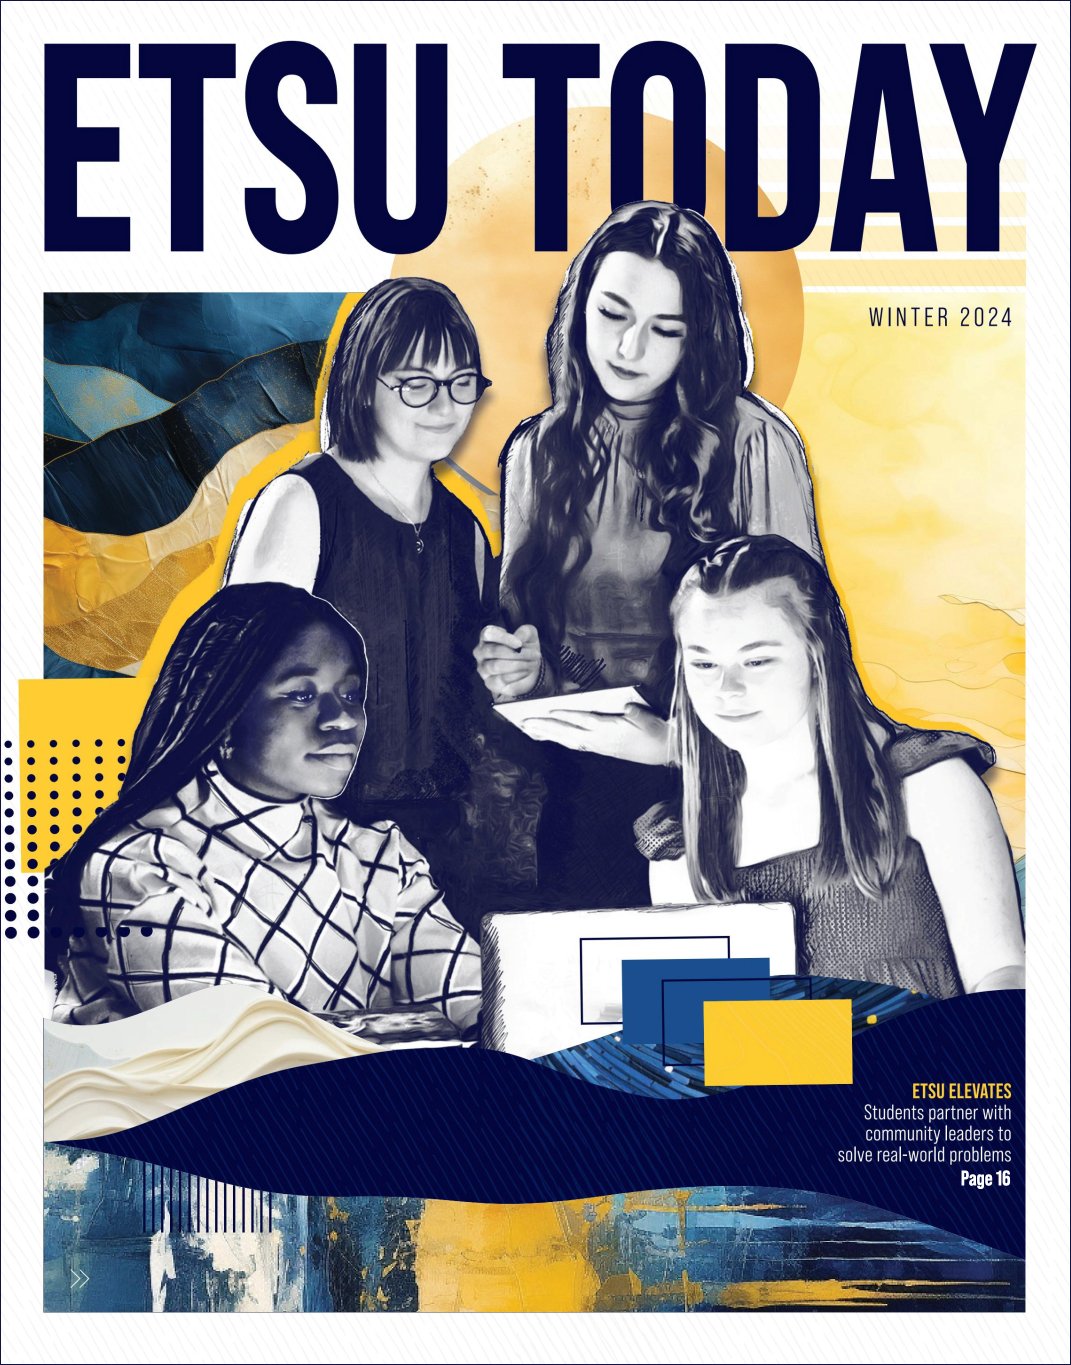 The cover of ETSU Today magazine, which features four students looking at a laptop who seem to be working on a project